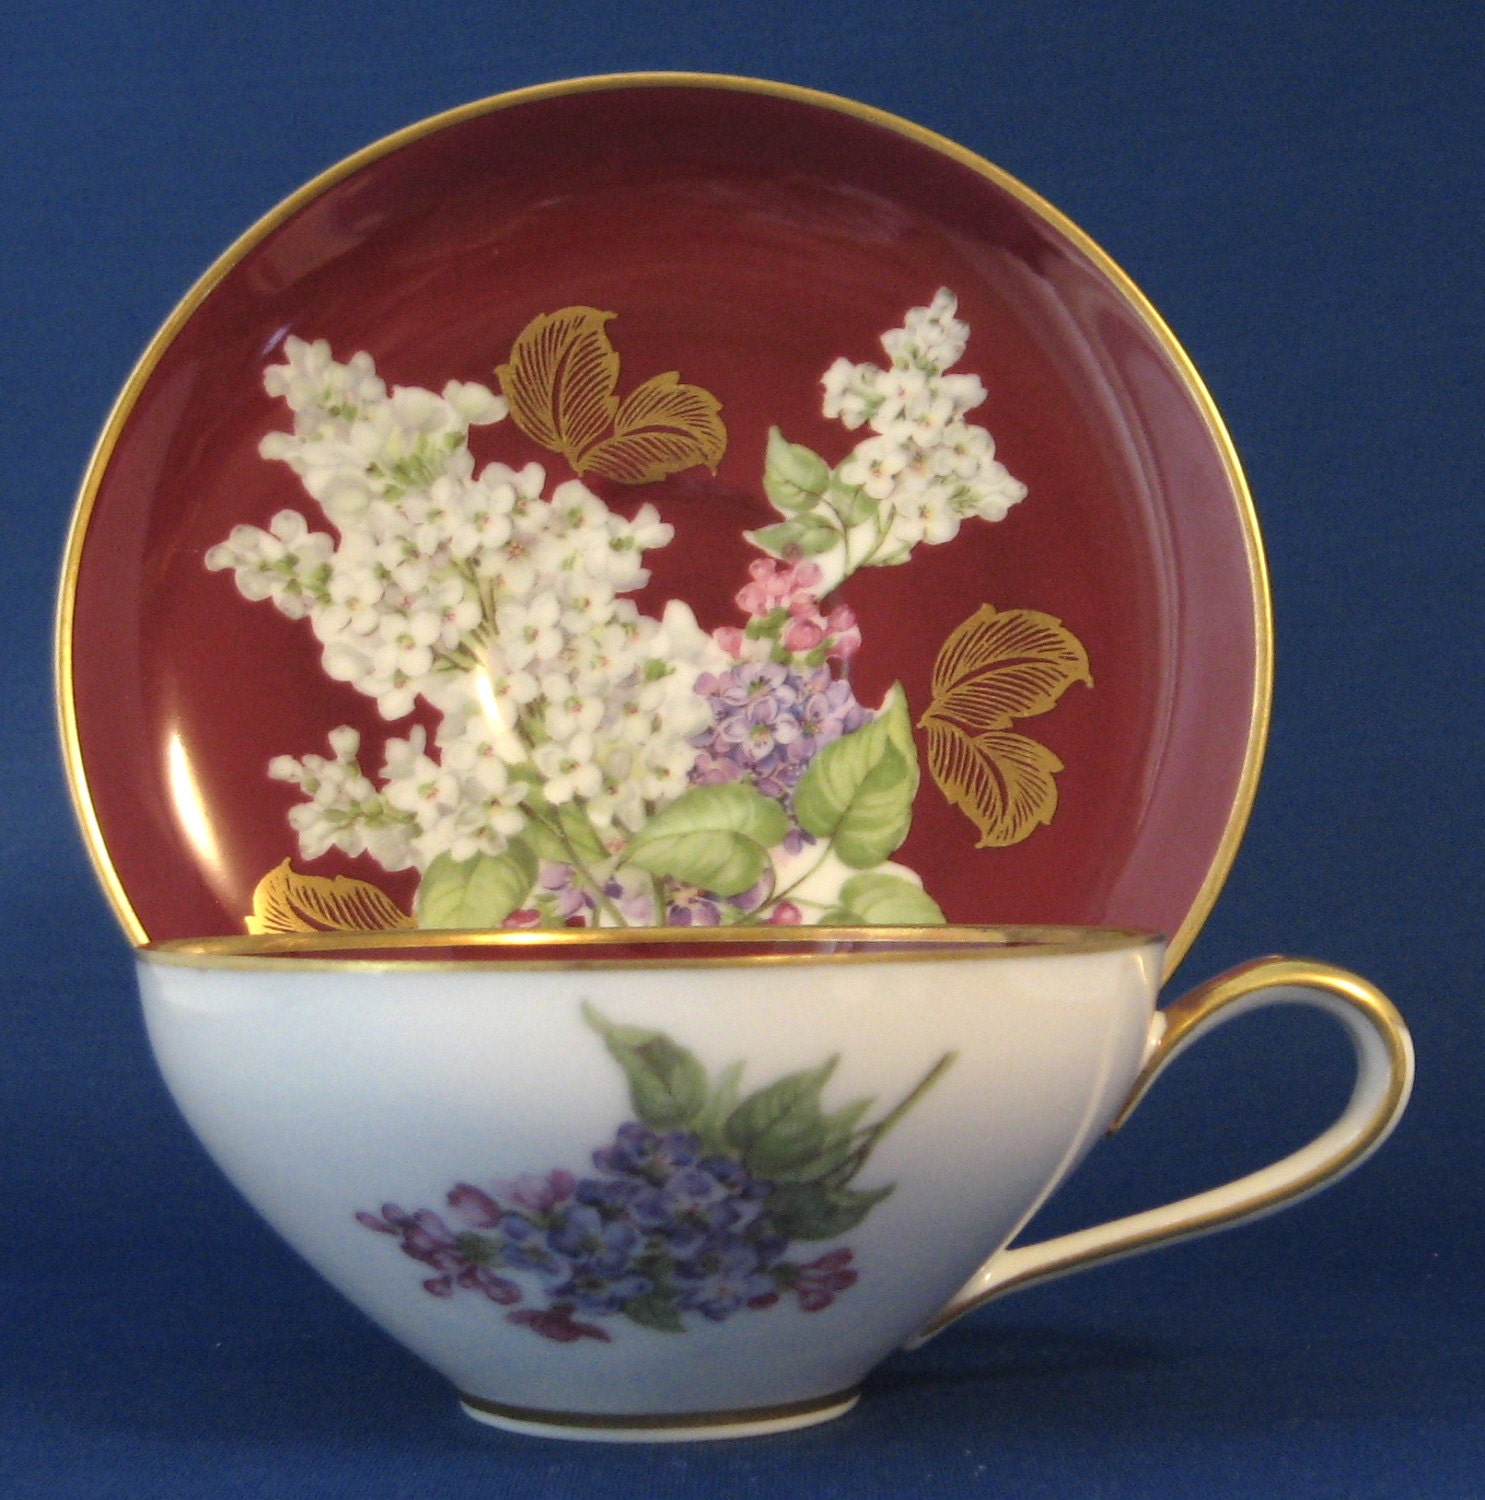 Cup Bavarian Rudolph  and Lilacs Saucer Wachter vintage saucer Vintage hire cup Burgundy And 1920s